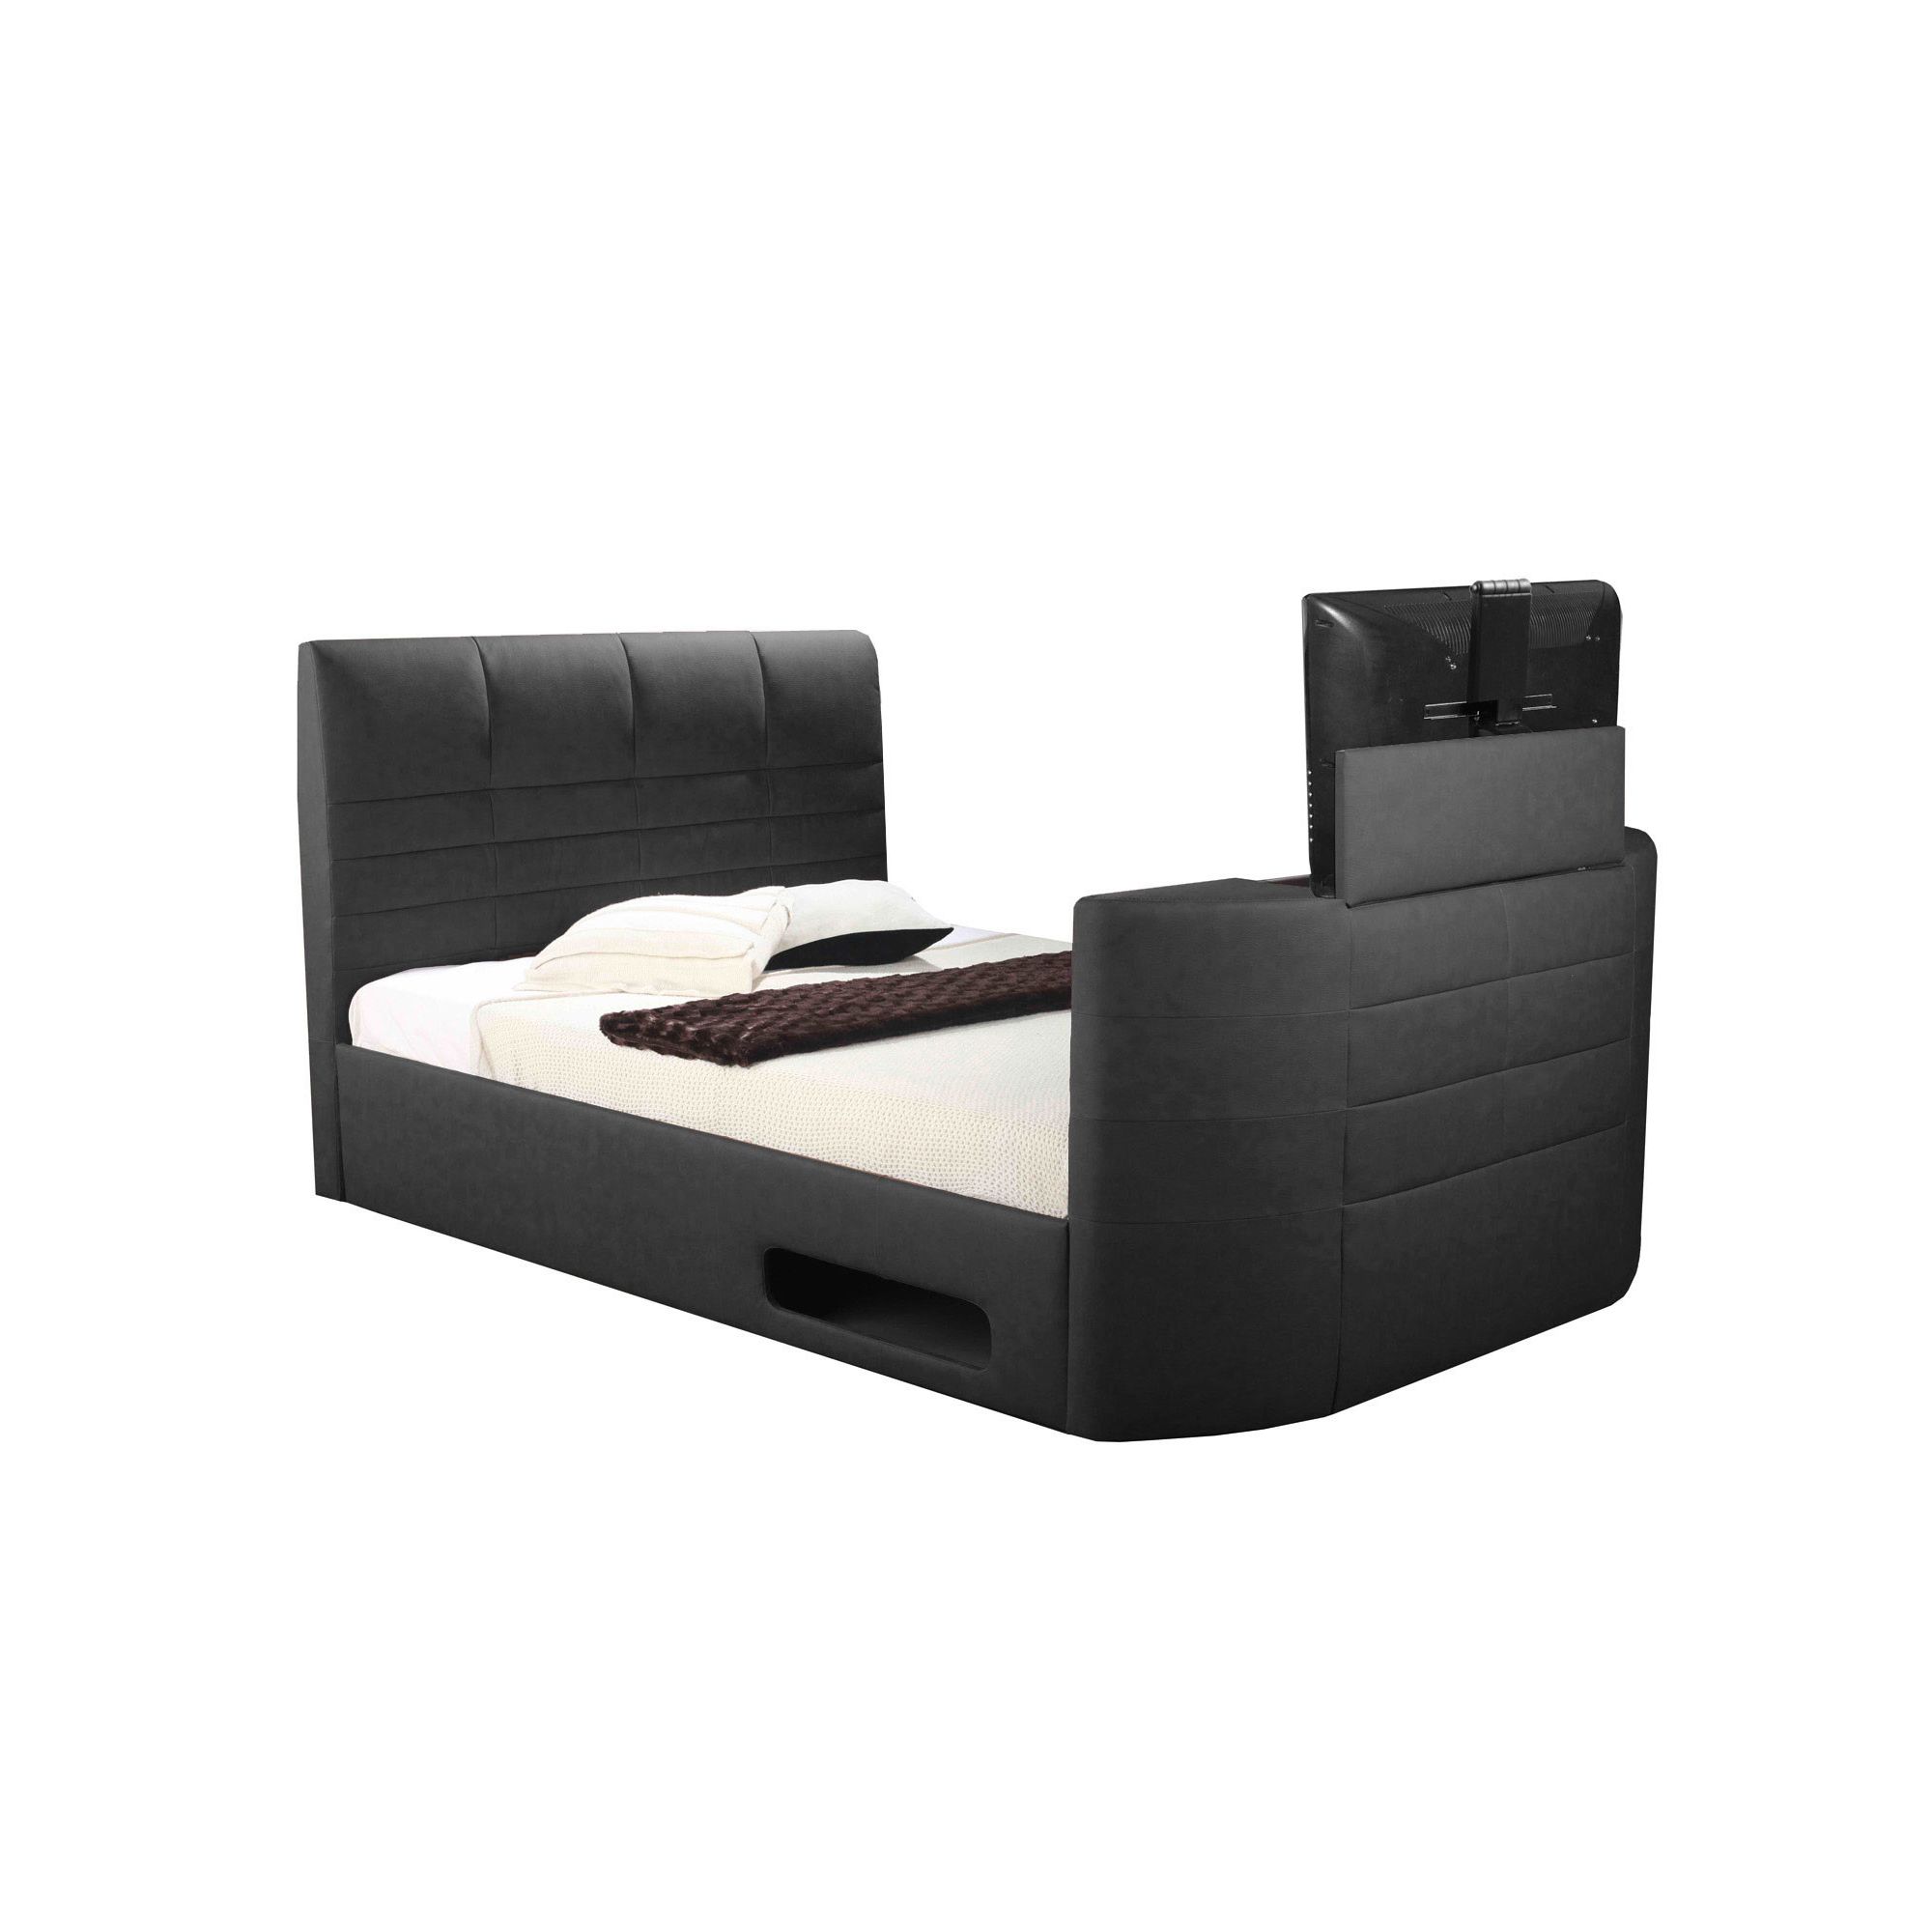 Altruna Miami Electric Wireless TV Bed - Double - Without Ottoman - Black at Tesco Direct